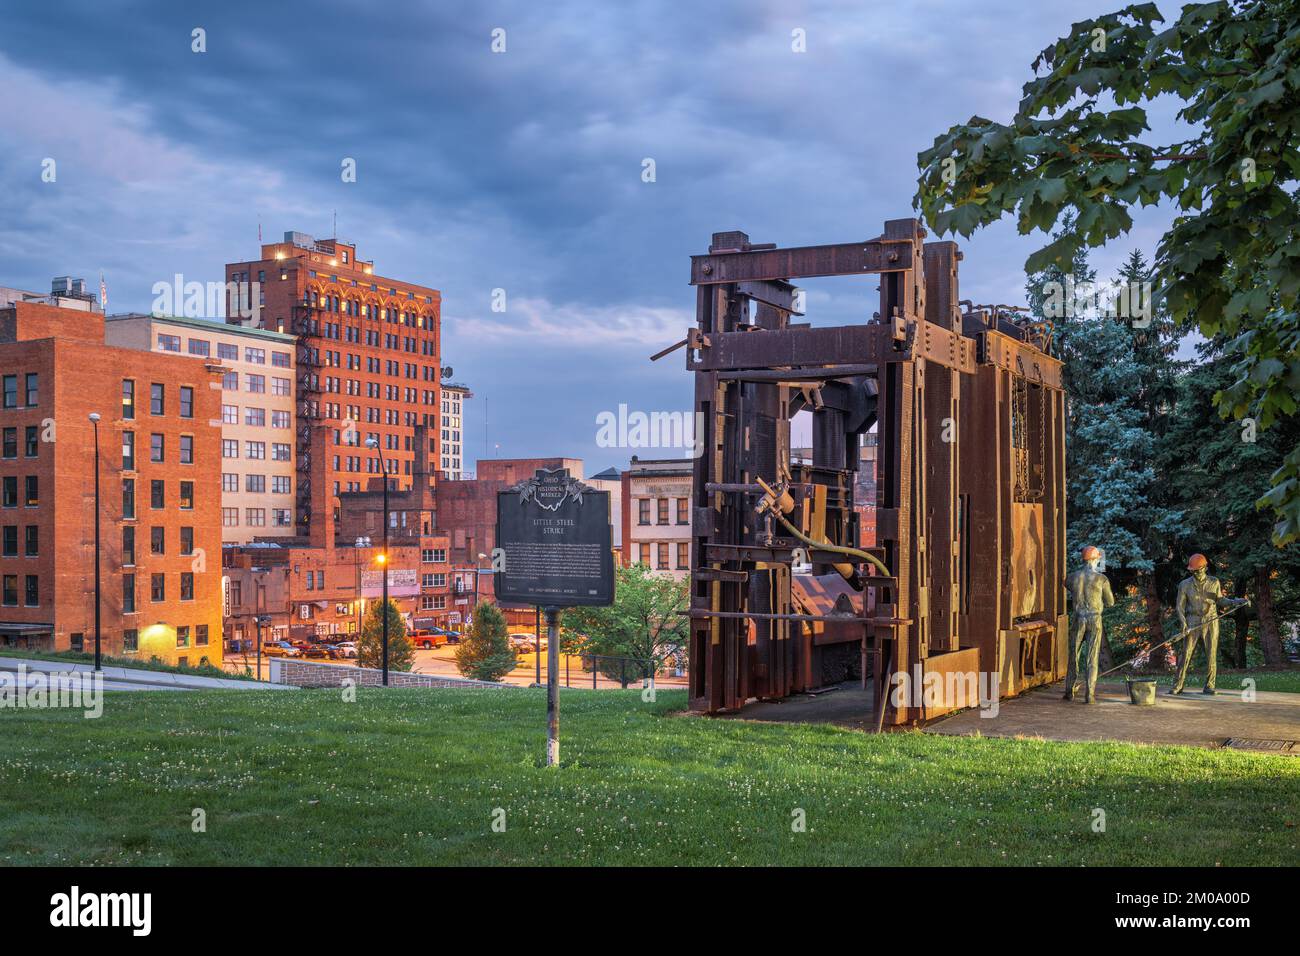 YOUNGSTOWN, OHIO - AUGUST 7, 2019:  Downtown Youngstown with the Little Steel Strike of 1937 monument and memorial at twilight. Stock Photo